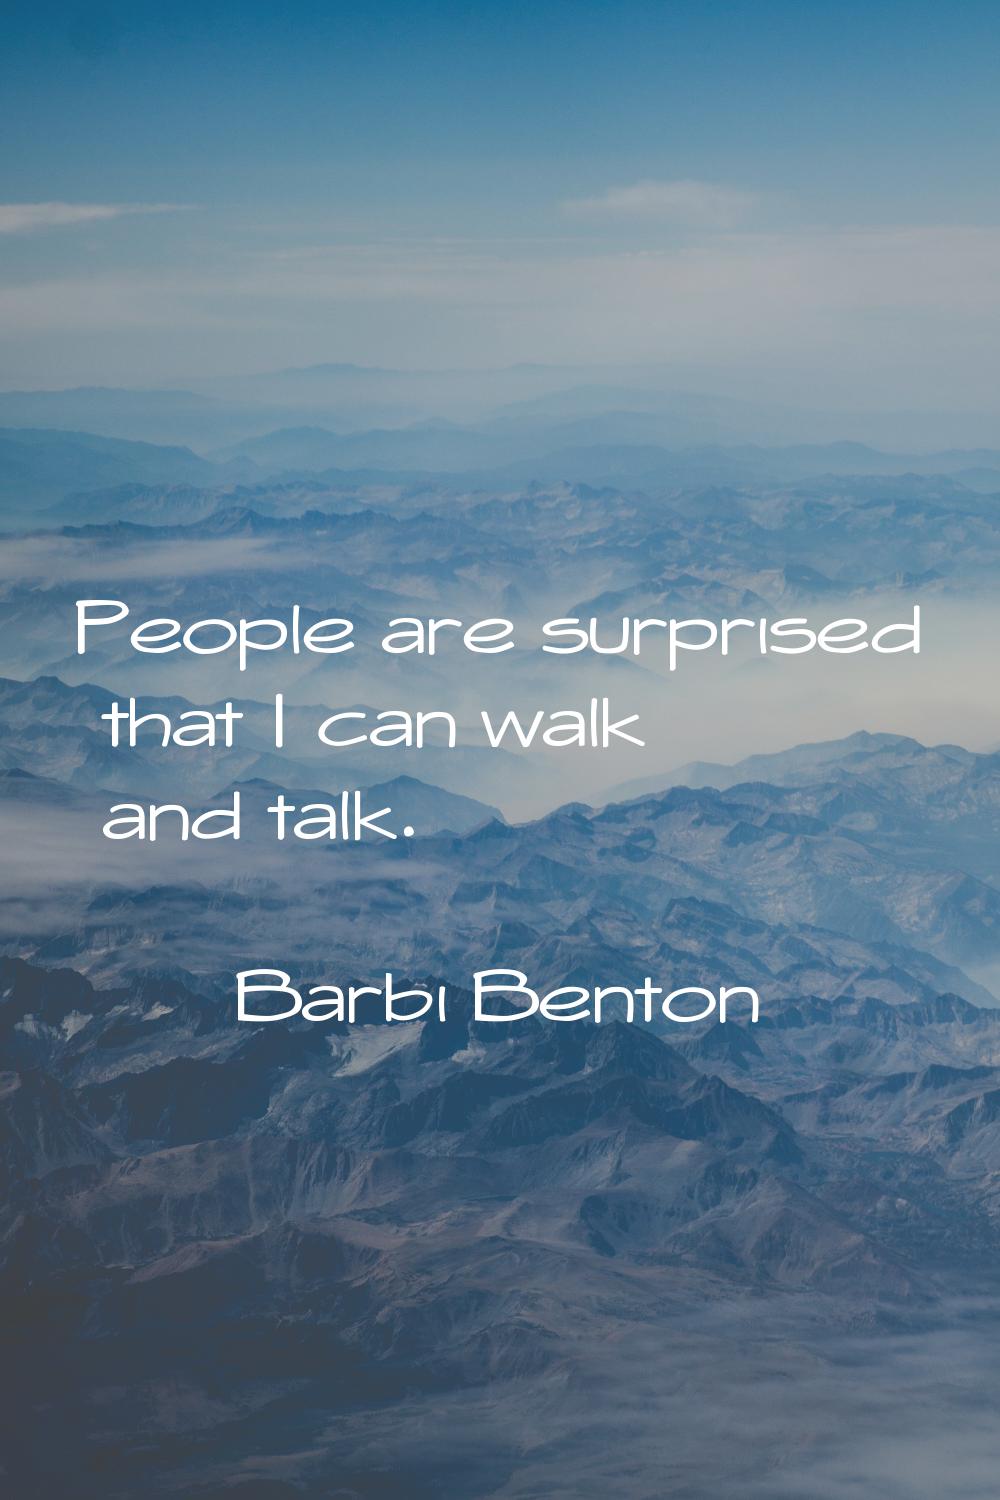 People are surprised that I can walk and talk.